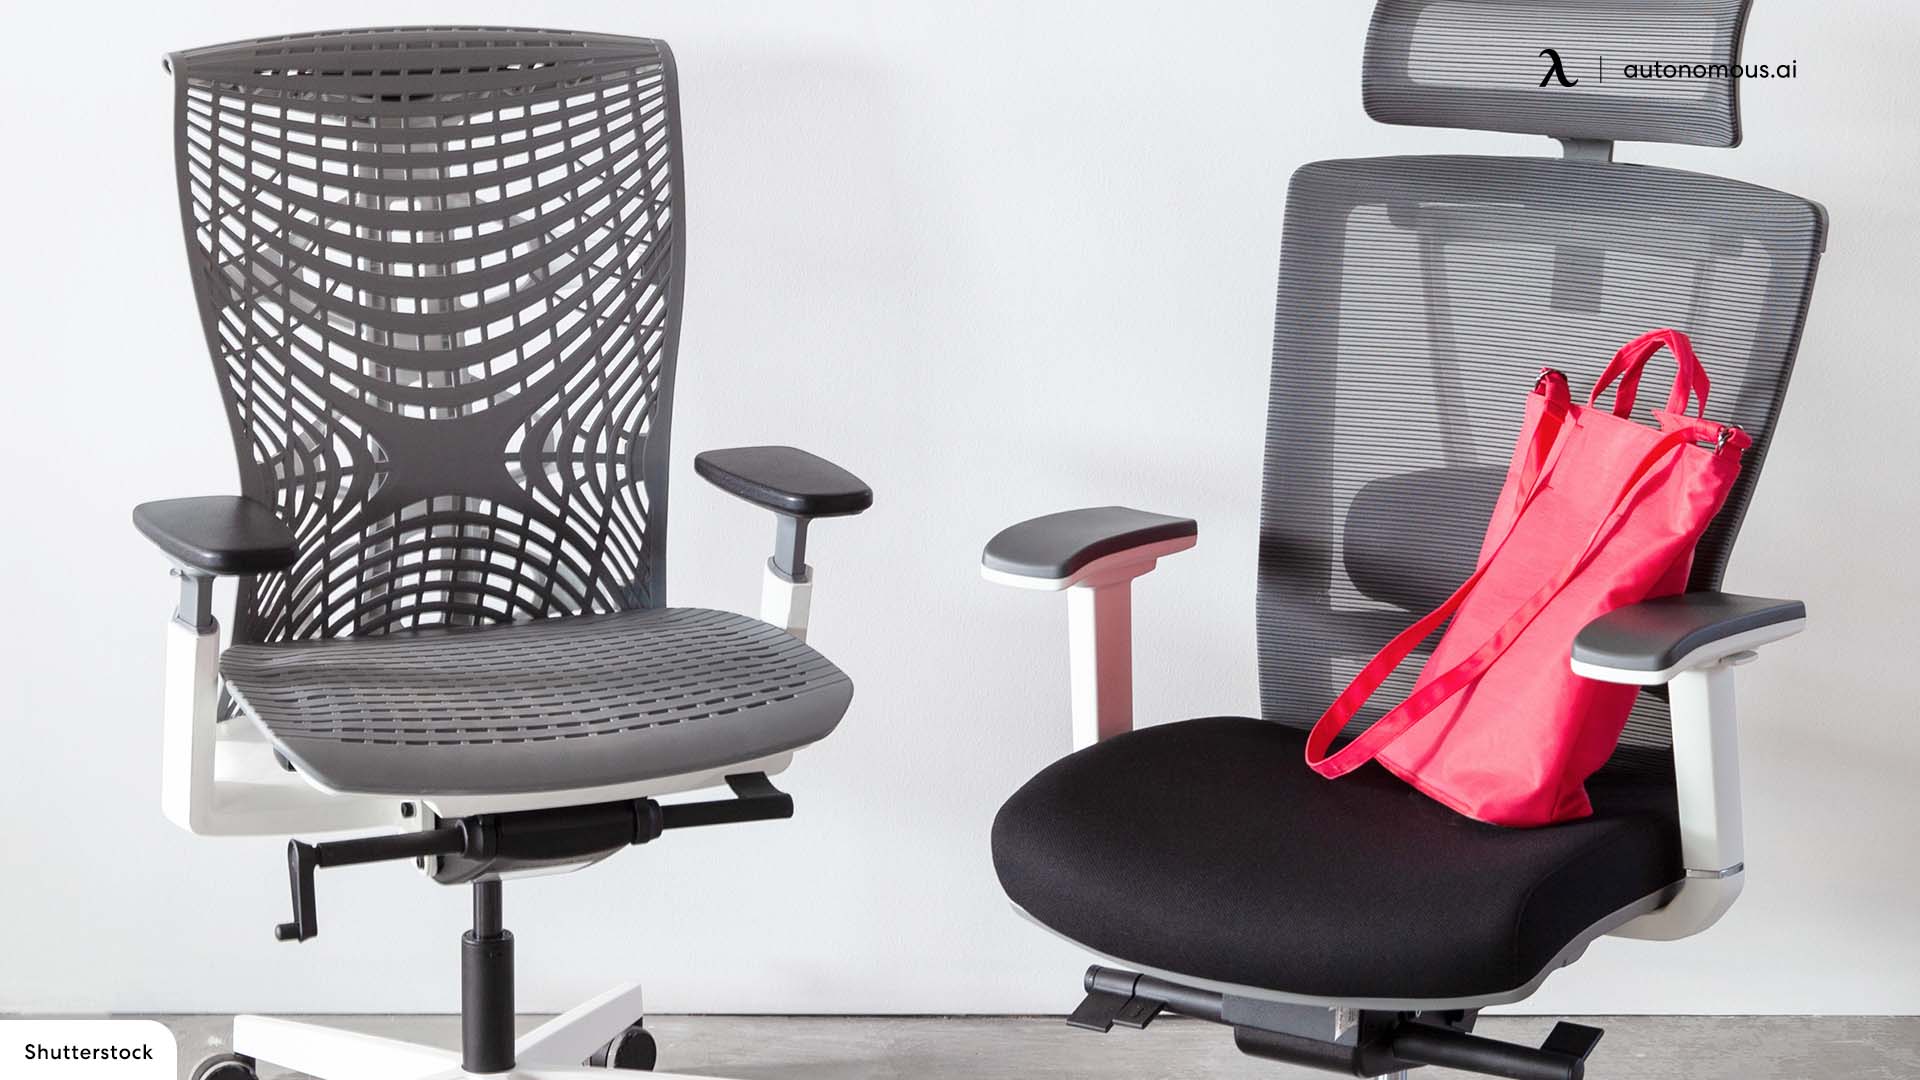 How to Replace an Office Chair Base: 3 Easy Steps